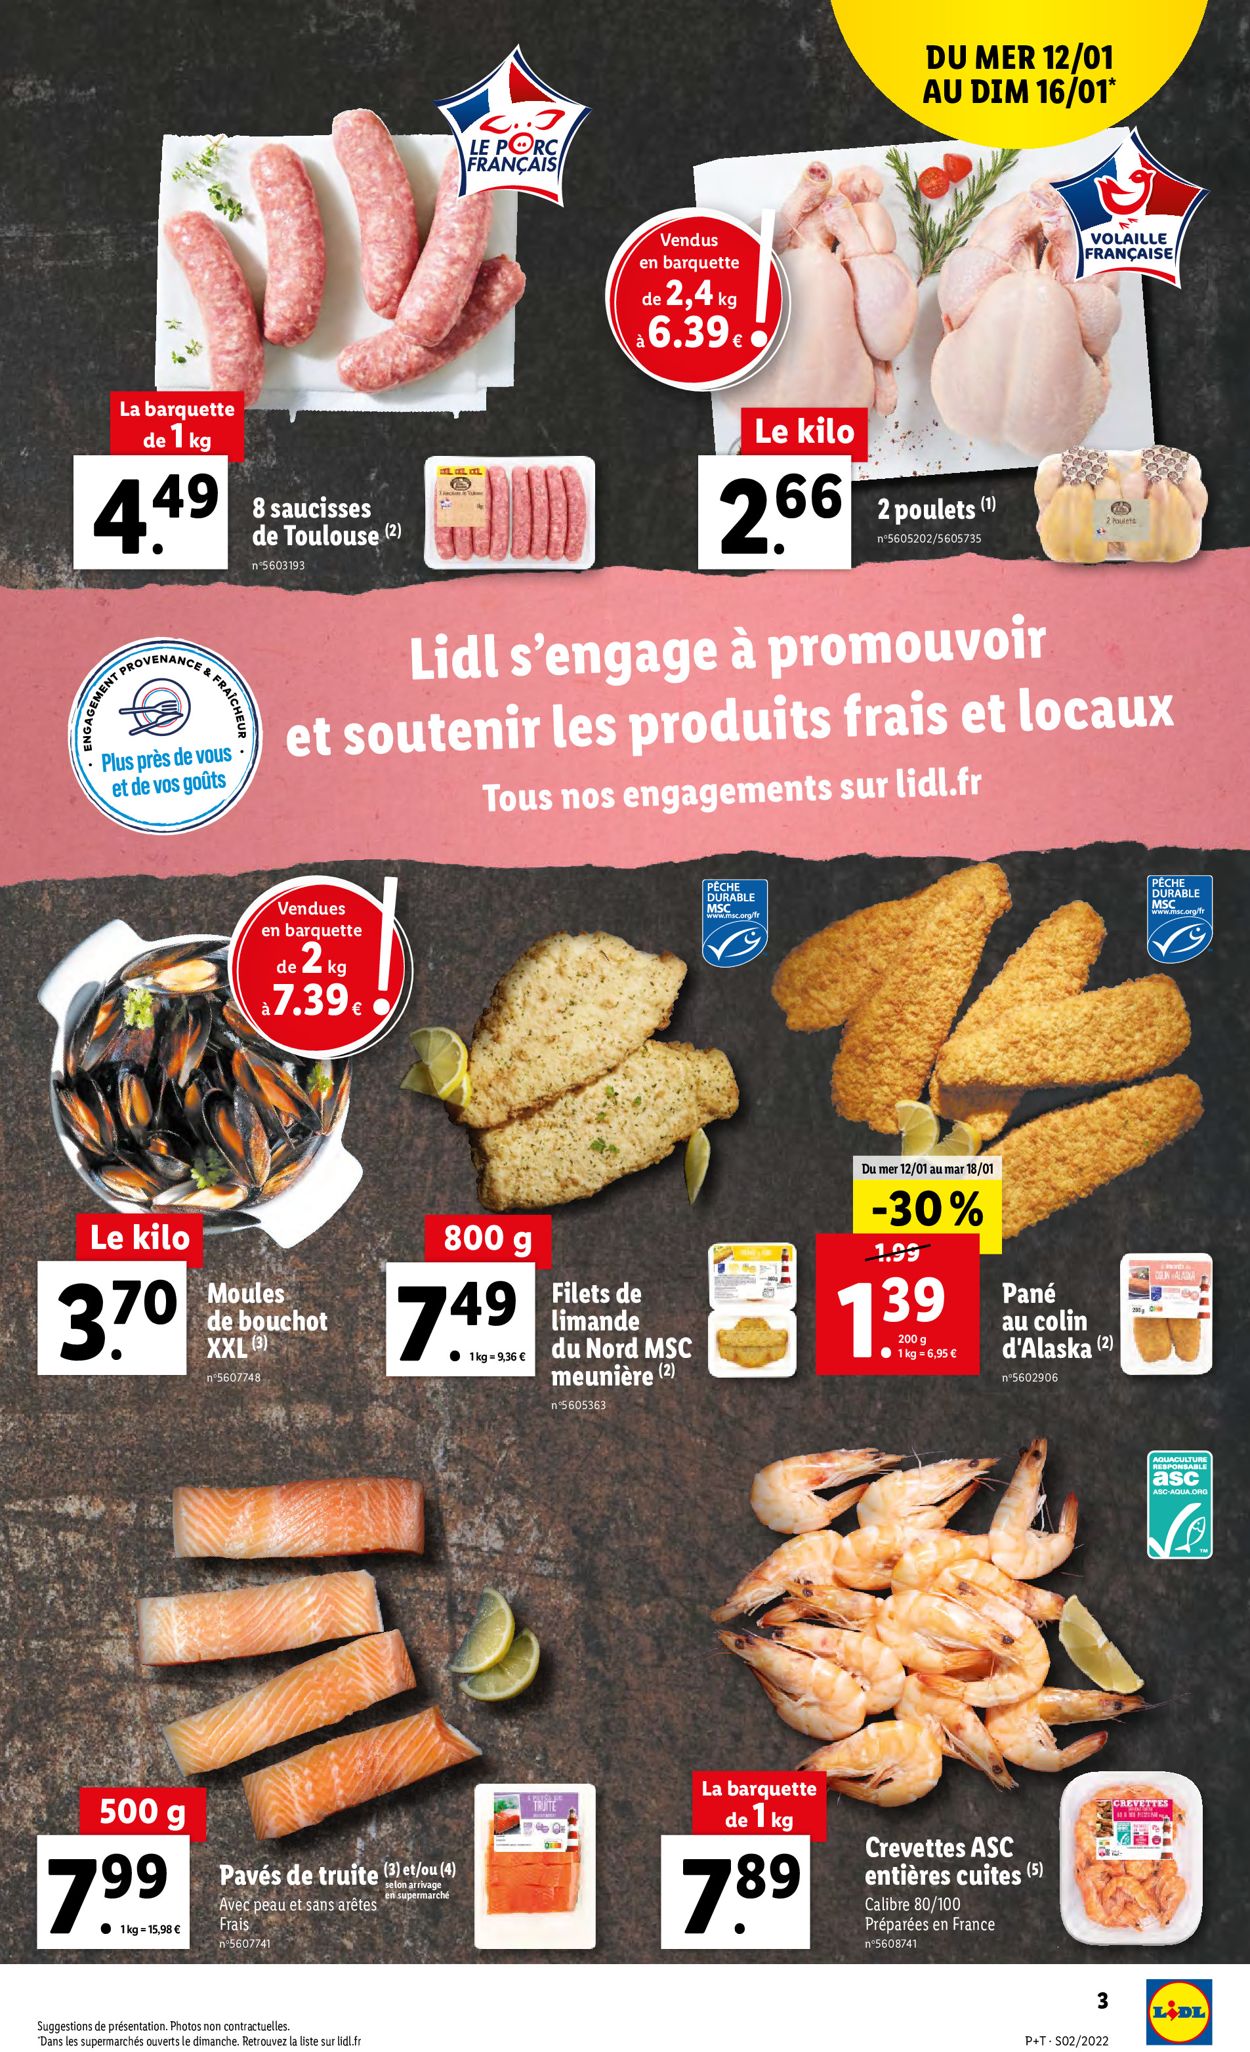 Lidl Catalogue - 12.01-18.01.2022 (Page 3)